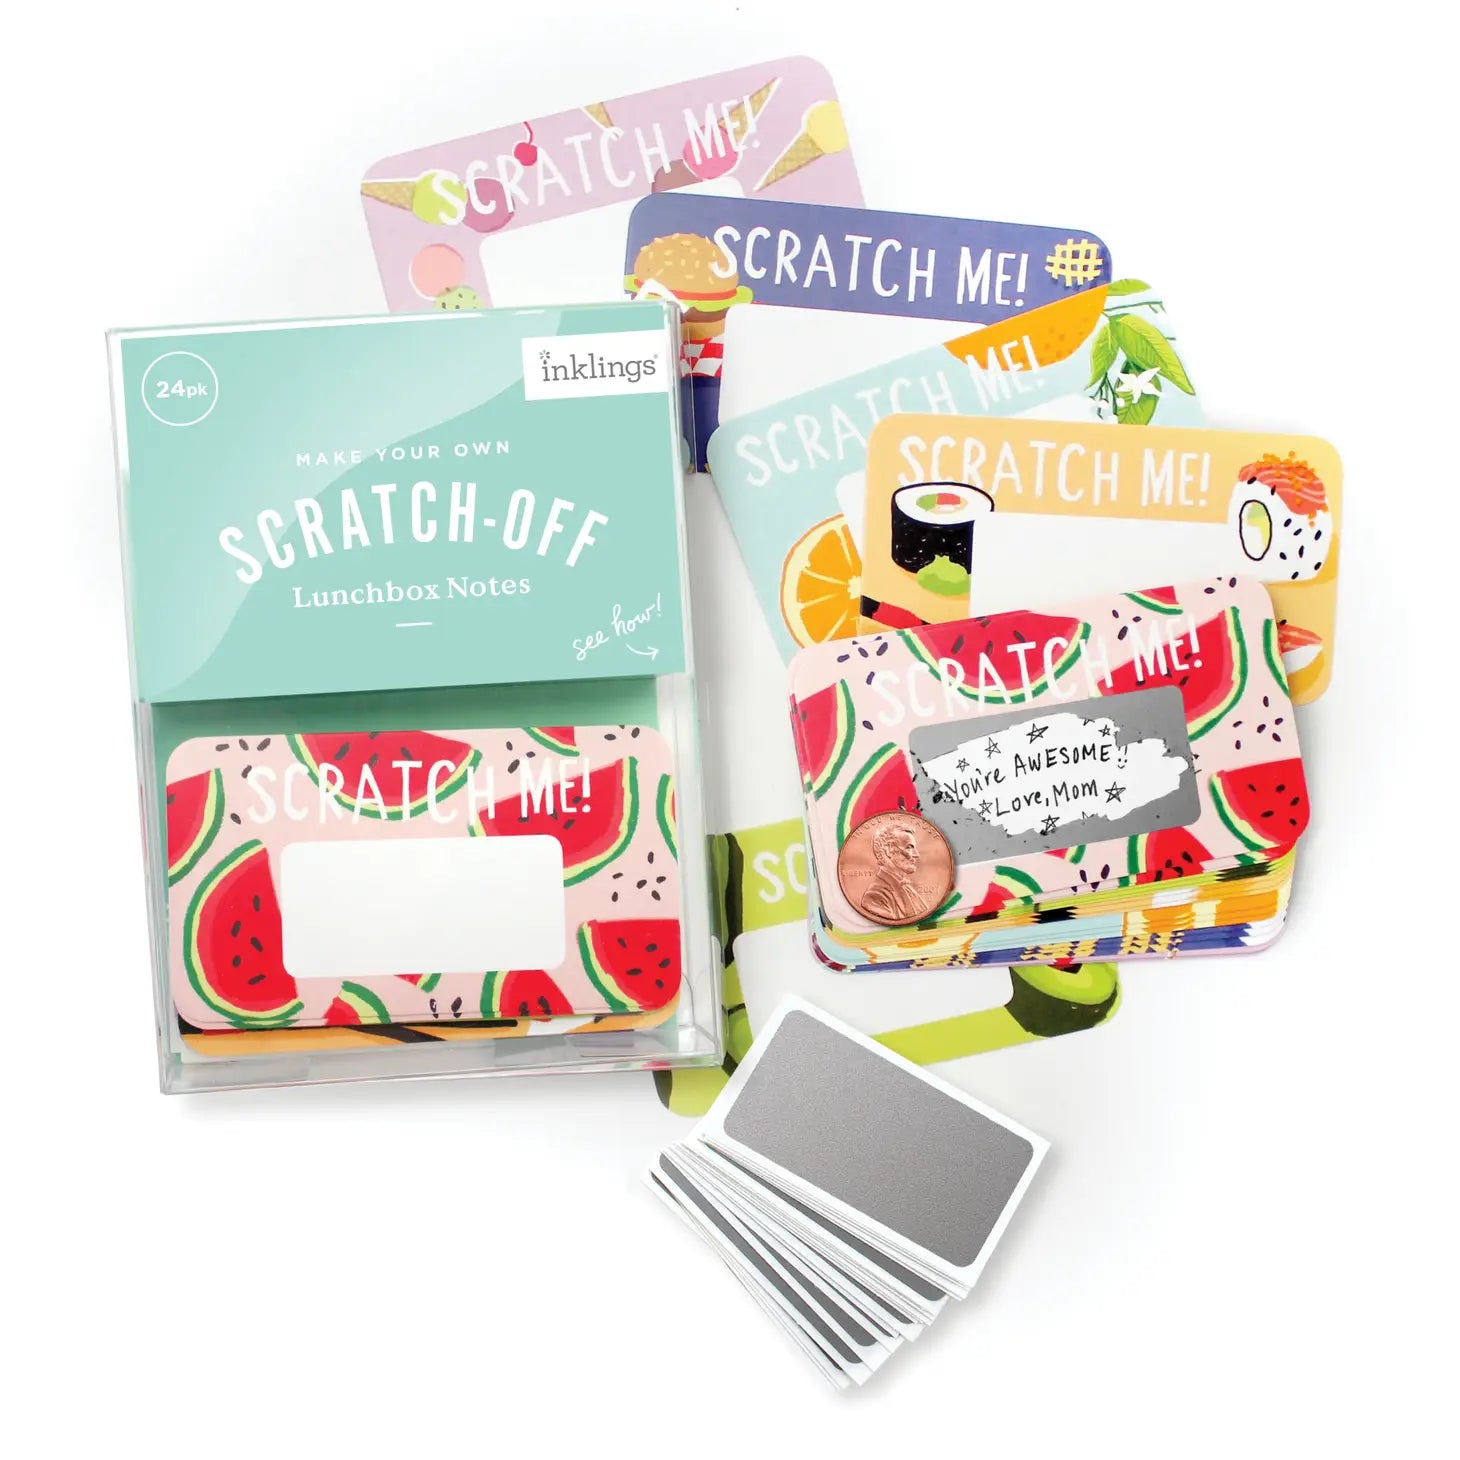 Scratch-off Valentines - Floral 18pk Class Pack